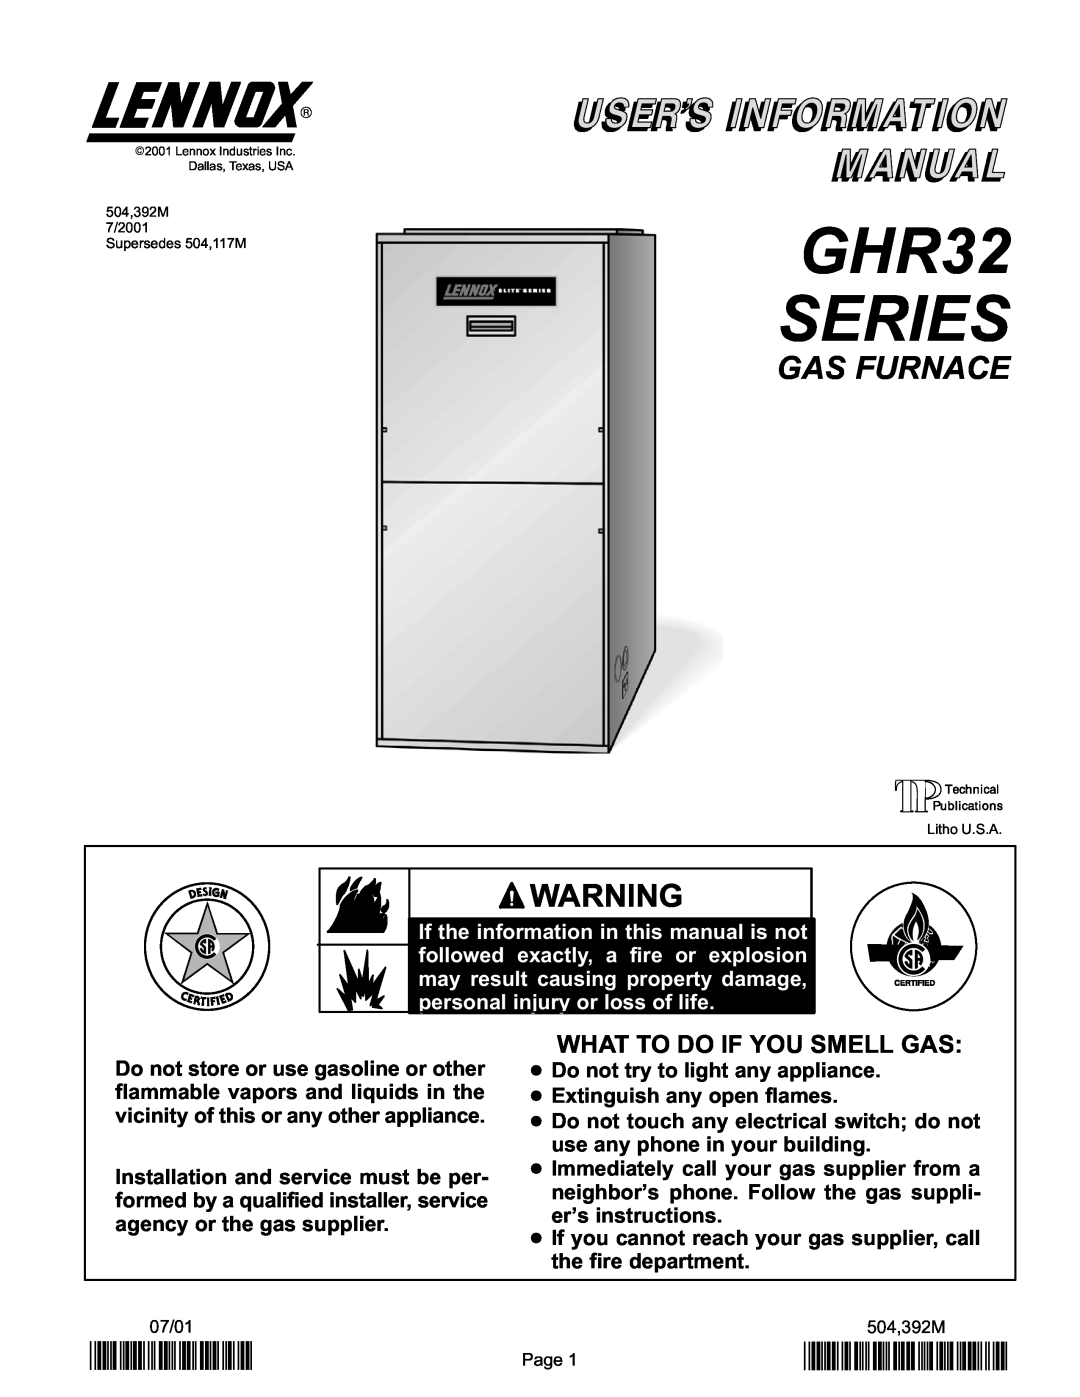 Lennox International Inc manual GHR32 SERIES, Gas Furnace, 2P0701, P504392M, What To Do If You Smell Gas 